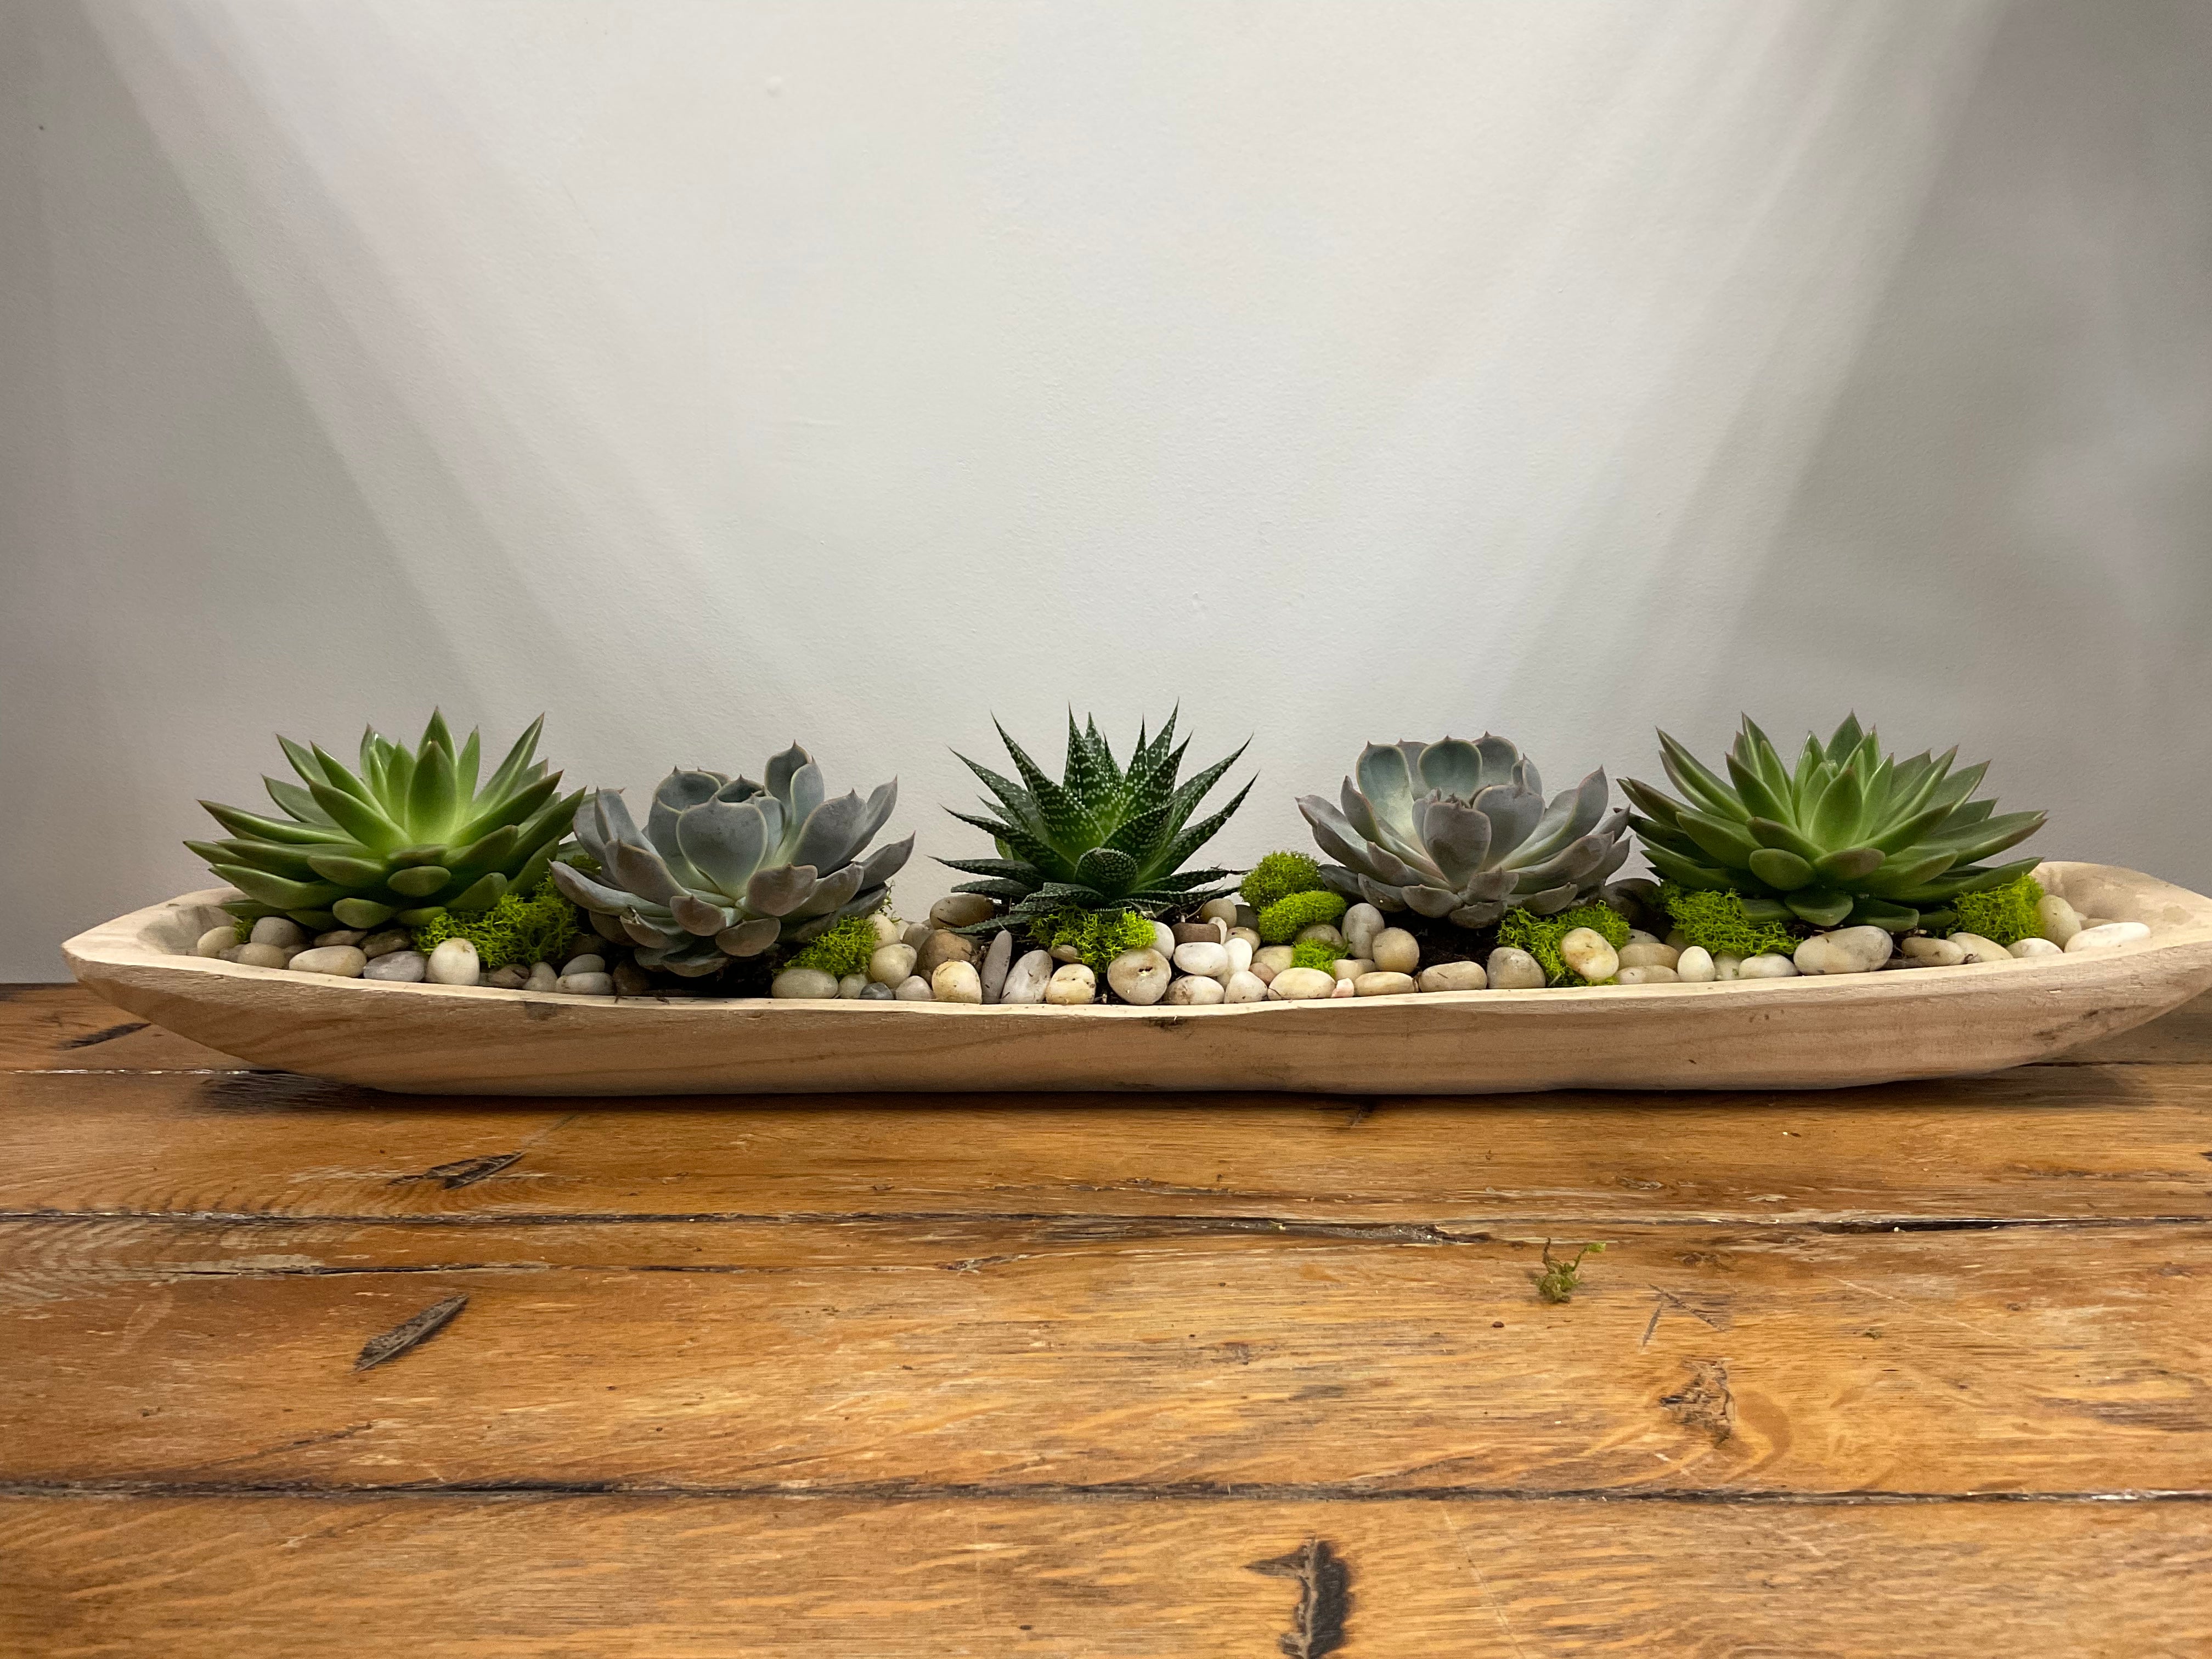 Large Succulents in Wooden Trough